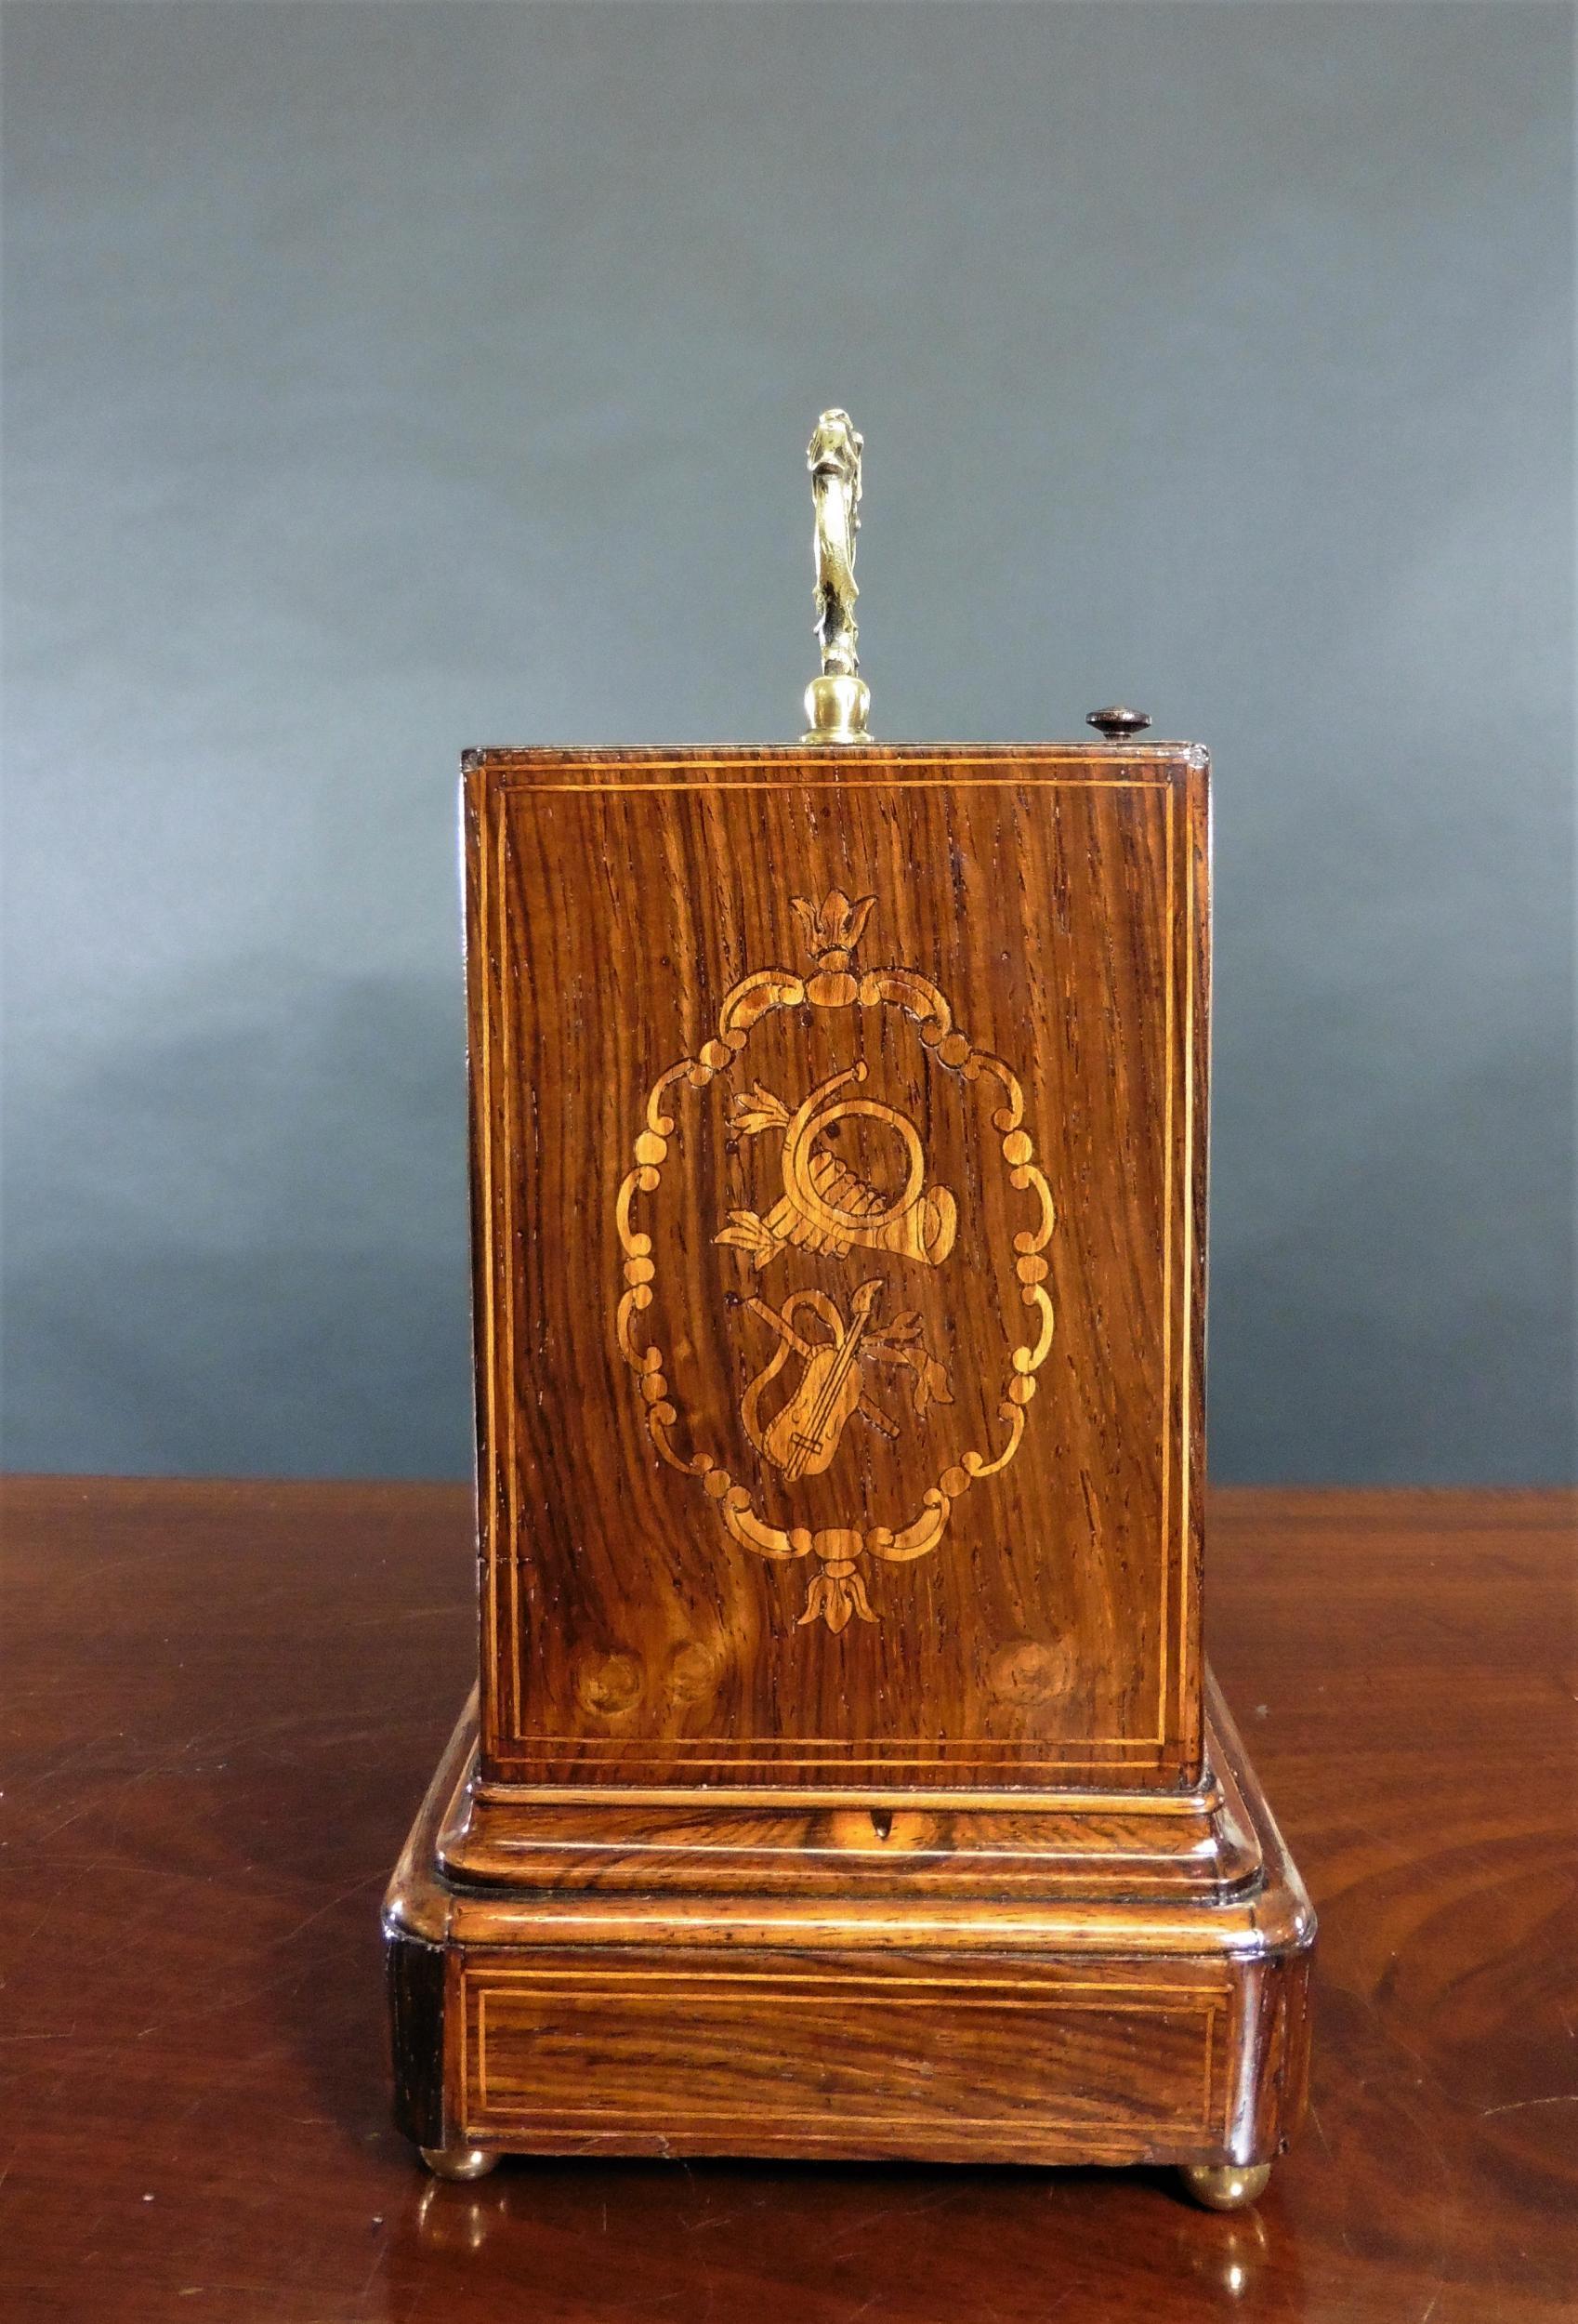 French Miniature rosewood Campaign clock

French miniature Campaign clock in a Rosewood case standing on a raised moulded plinth and inlaid with satinwood line stringing and floral decoration. Rising glass front with top glazed viewing aperture